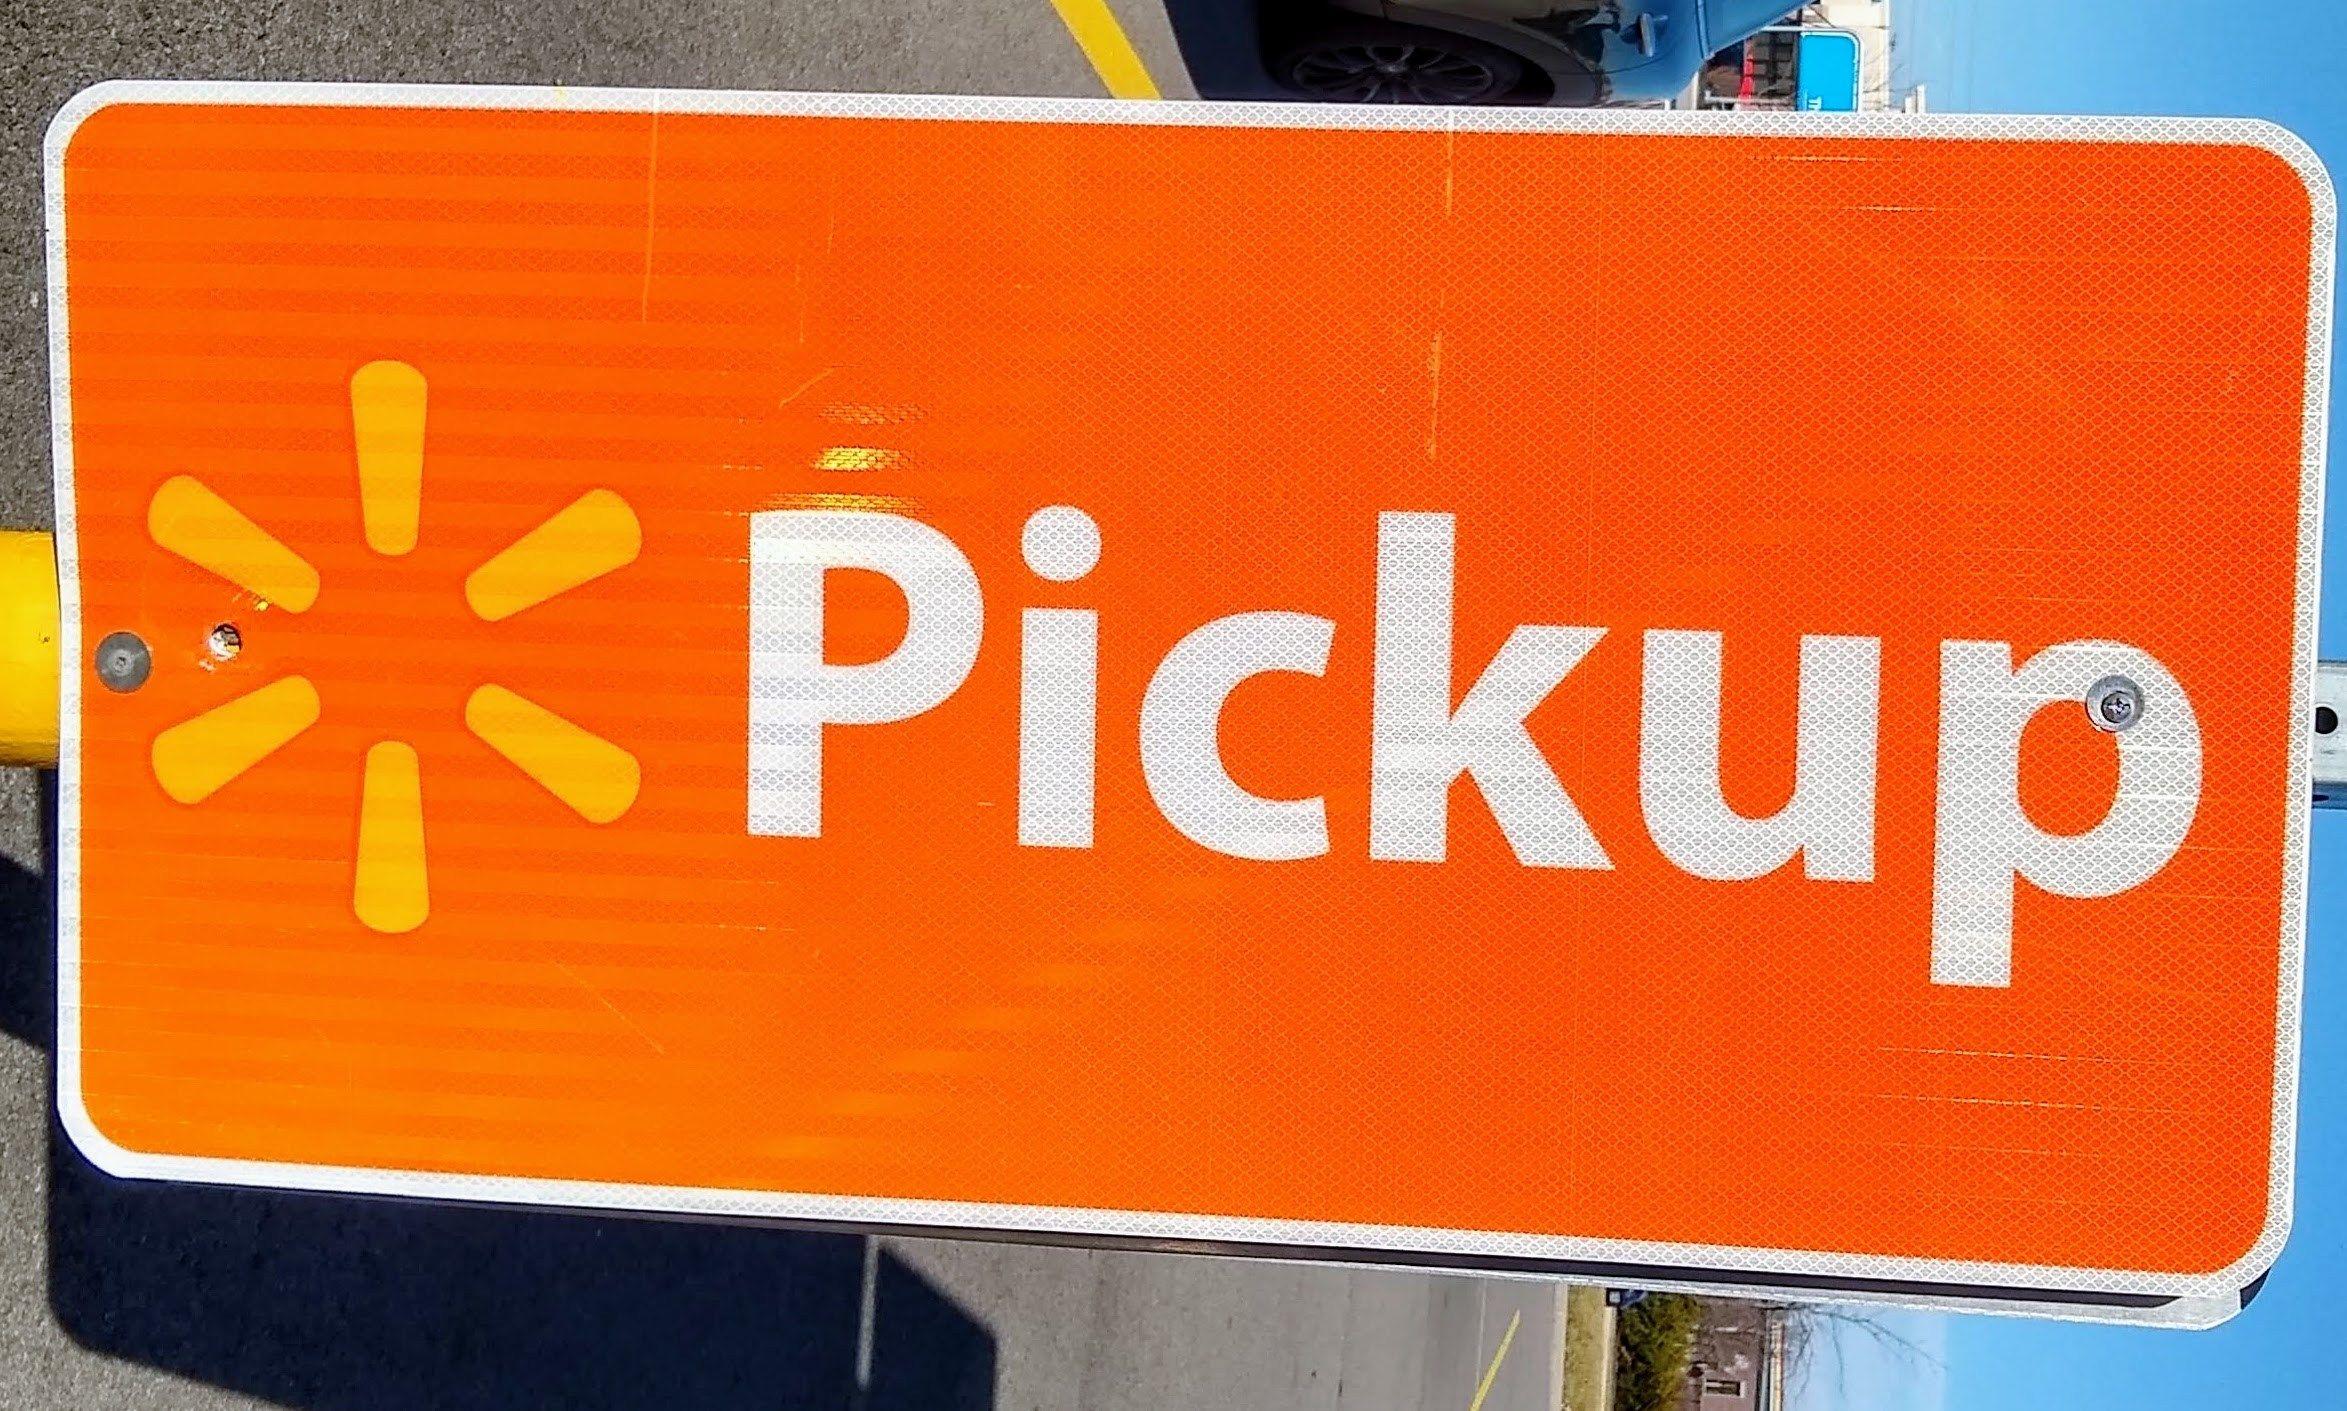 Walmart Grocery Pick Up Logo - Walmart Grocery Pickup: Why I'm Never Going Grocery Shopping Again